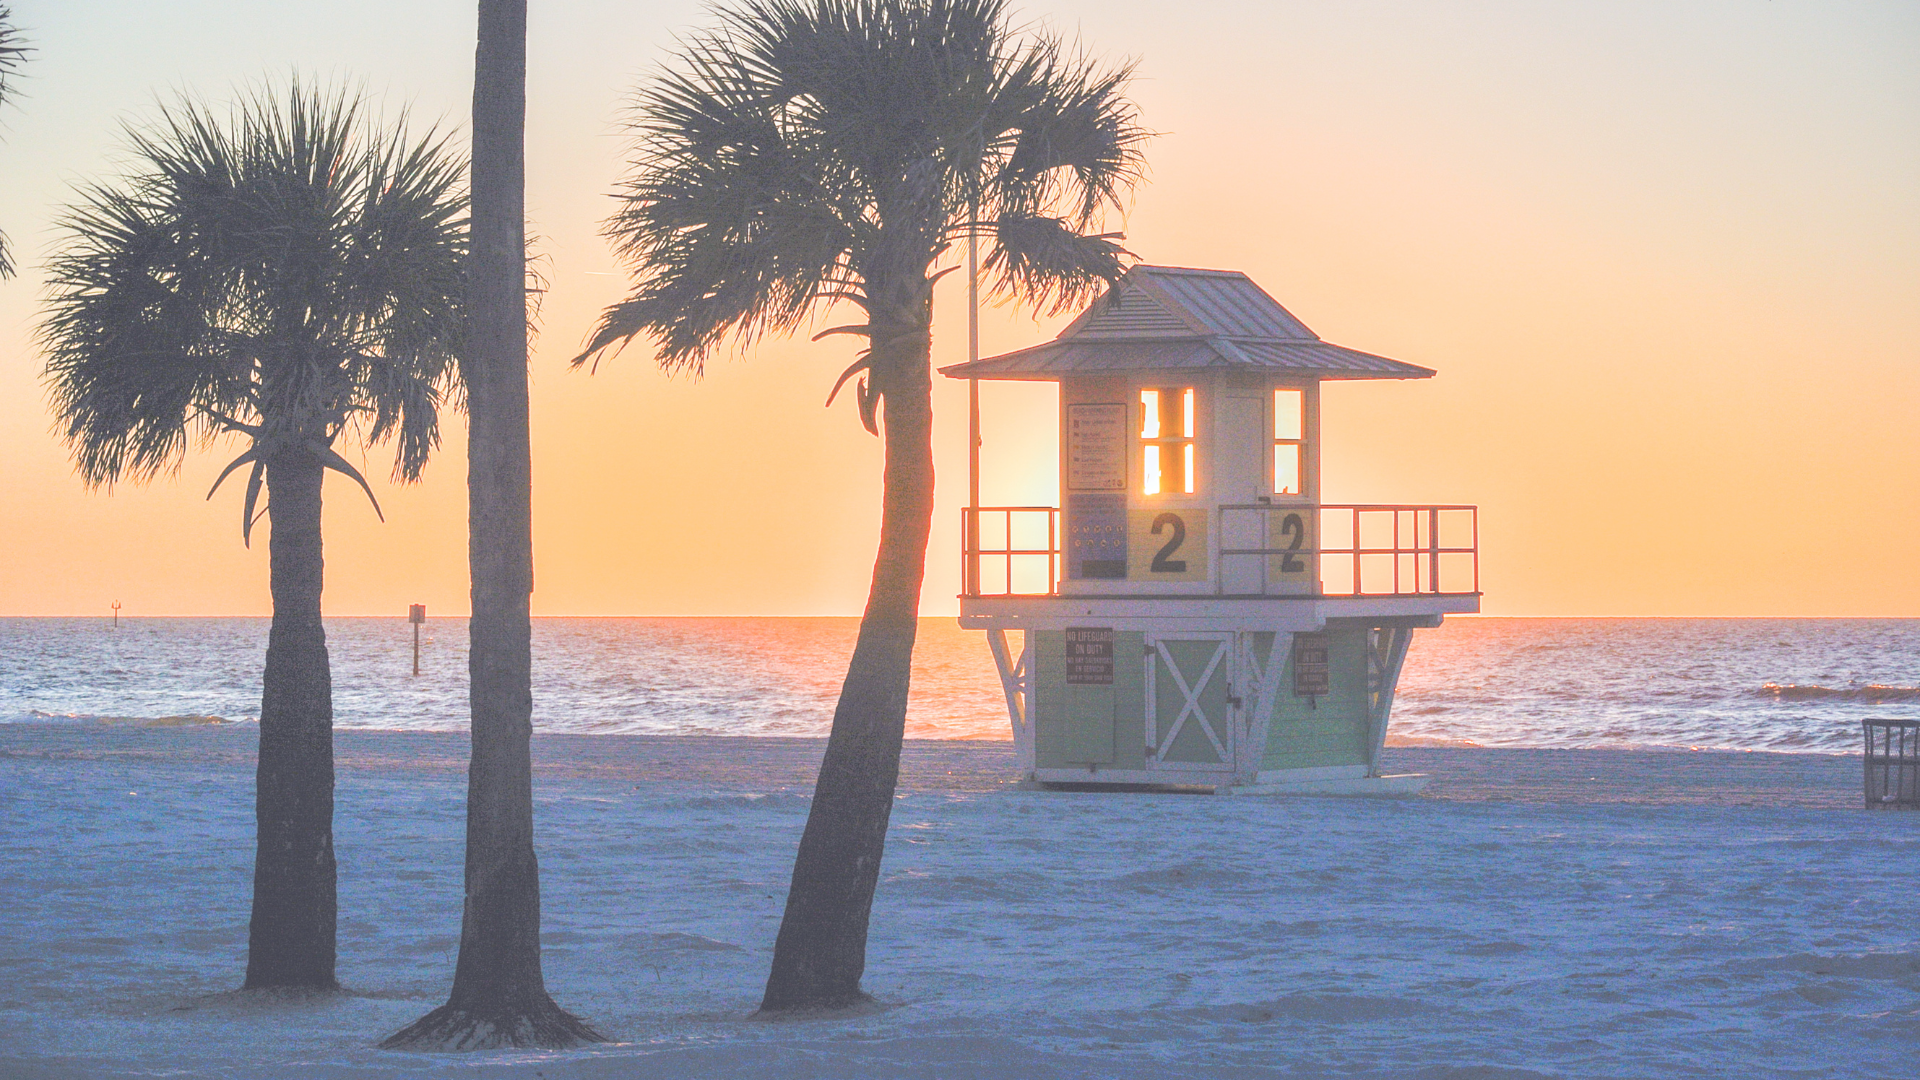 Which Beach is Better St Pete or Clearwater: Picture shows Clearwater Beach at Sunset with the lifeguard stand surrounded by palm trees.